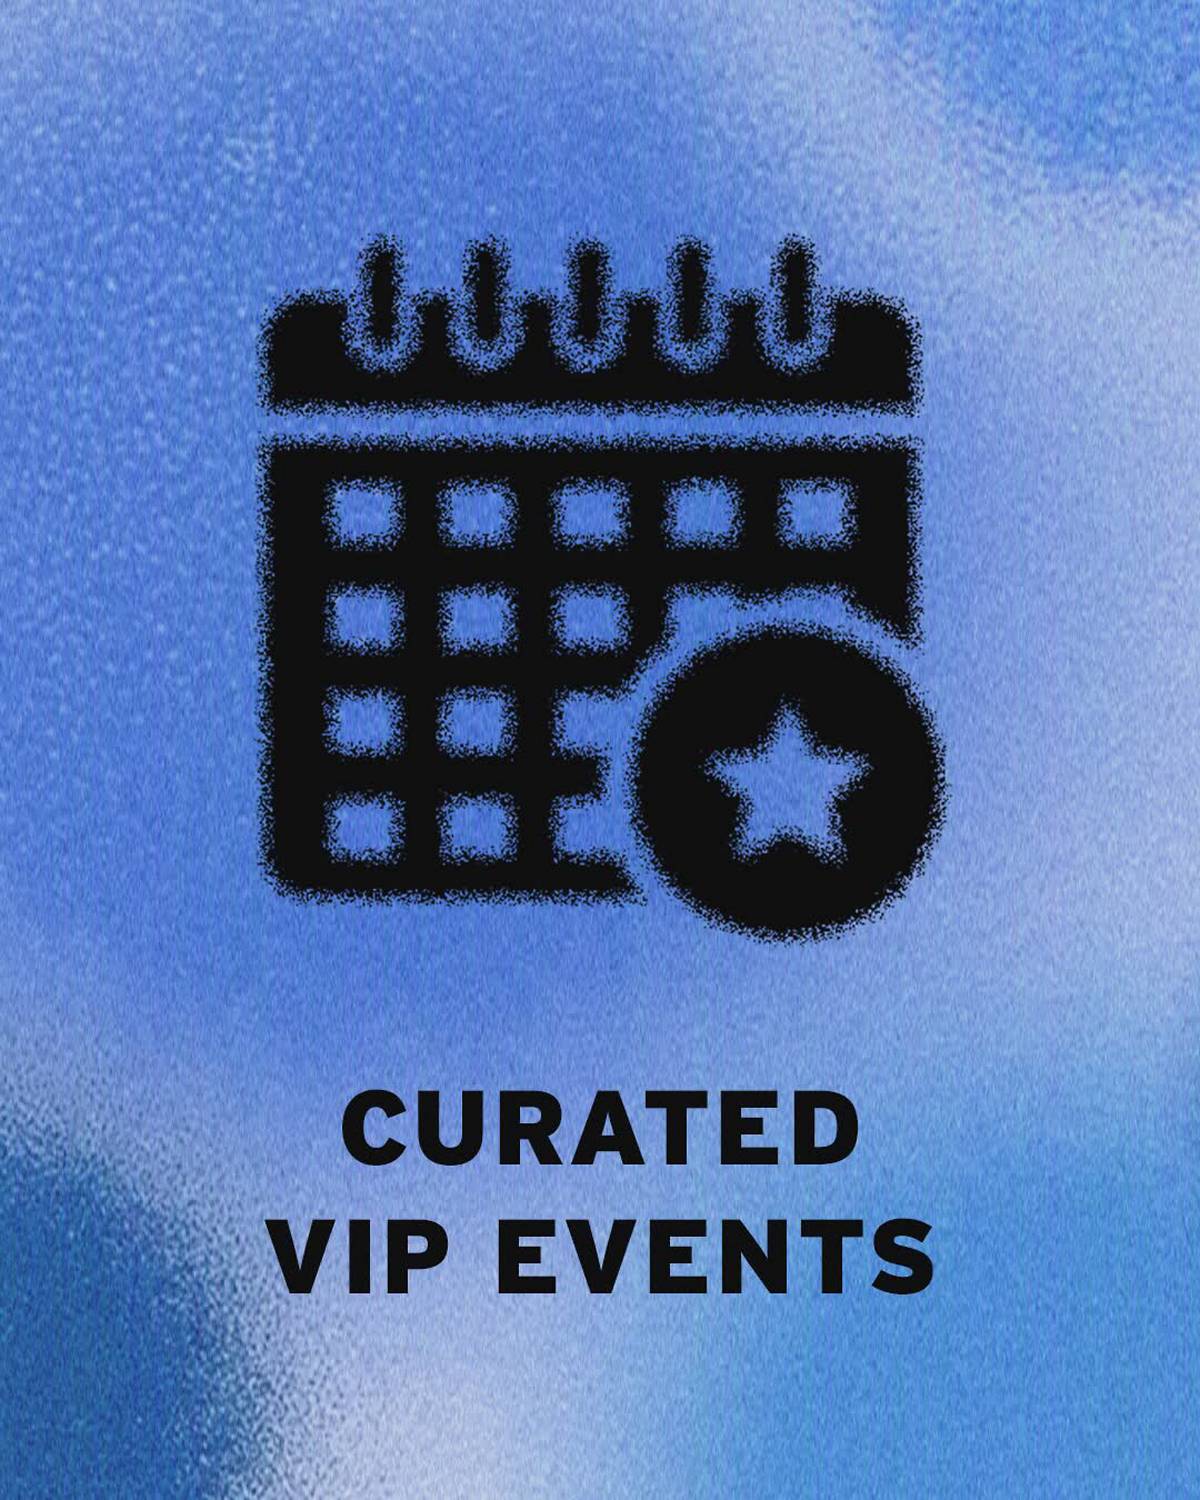 Icon of a calendar and the words "Curated VIP Events" overlayed on a blue background.